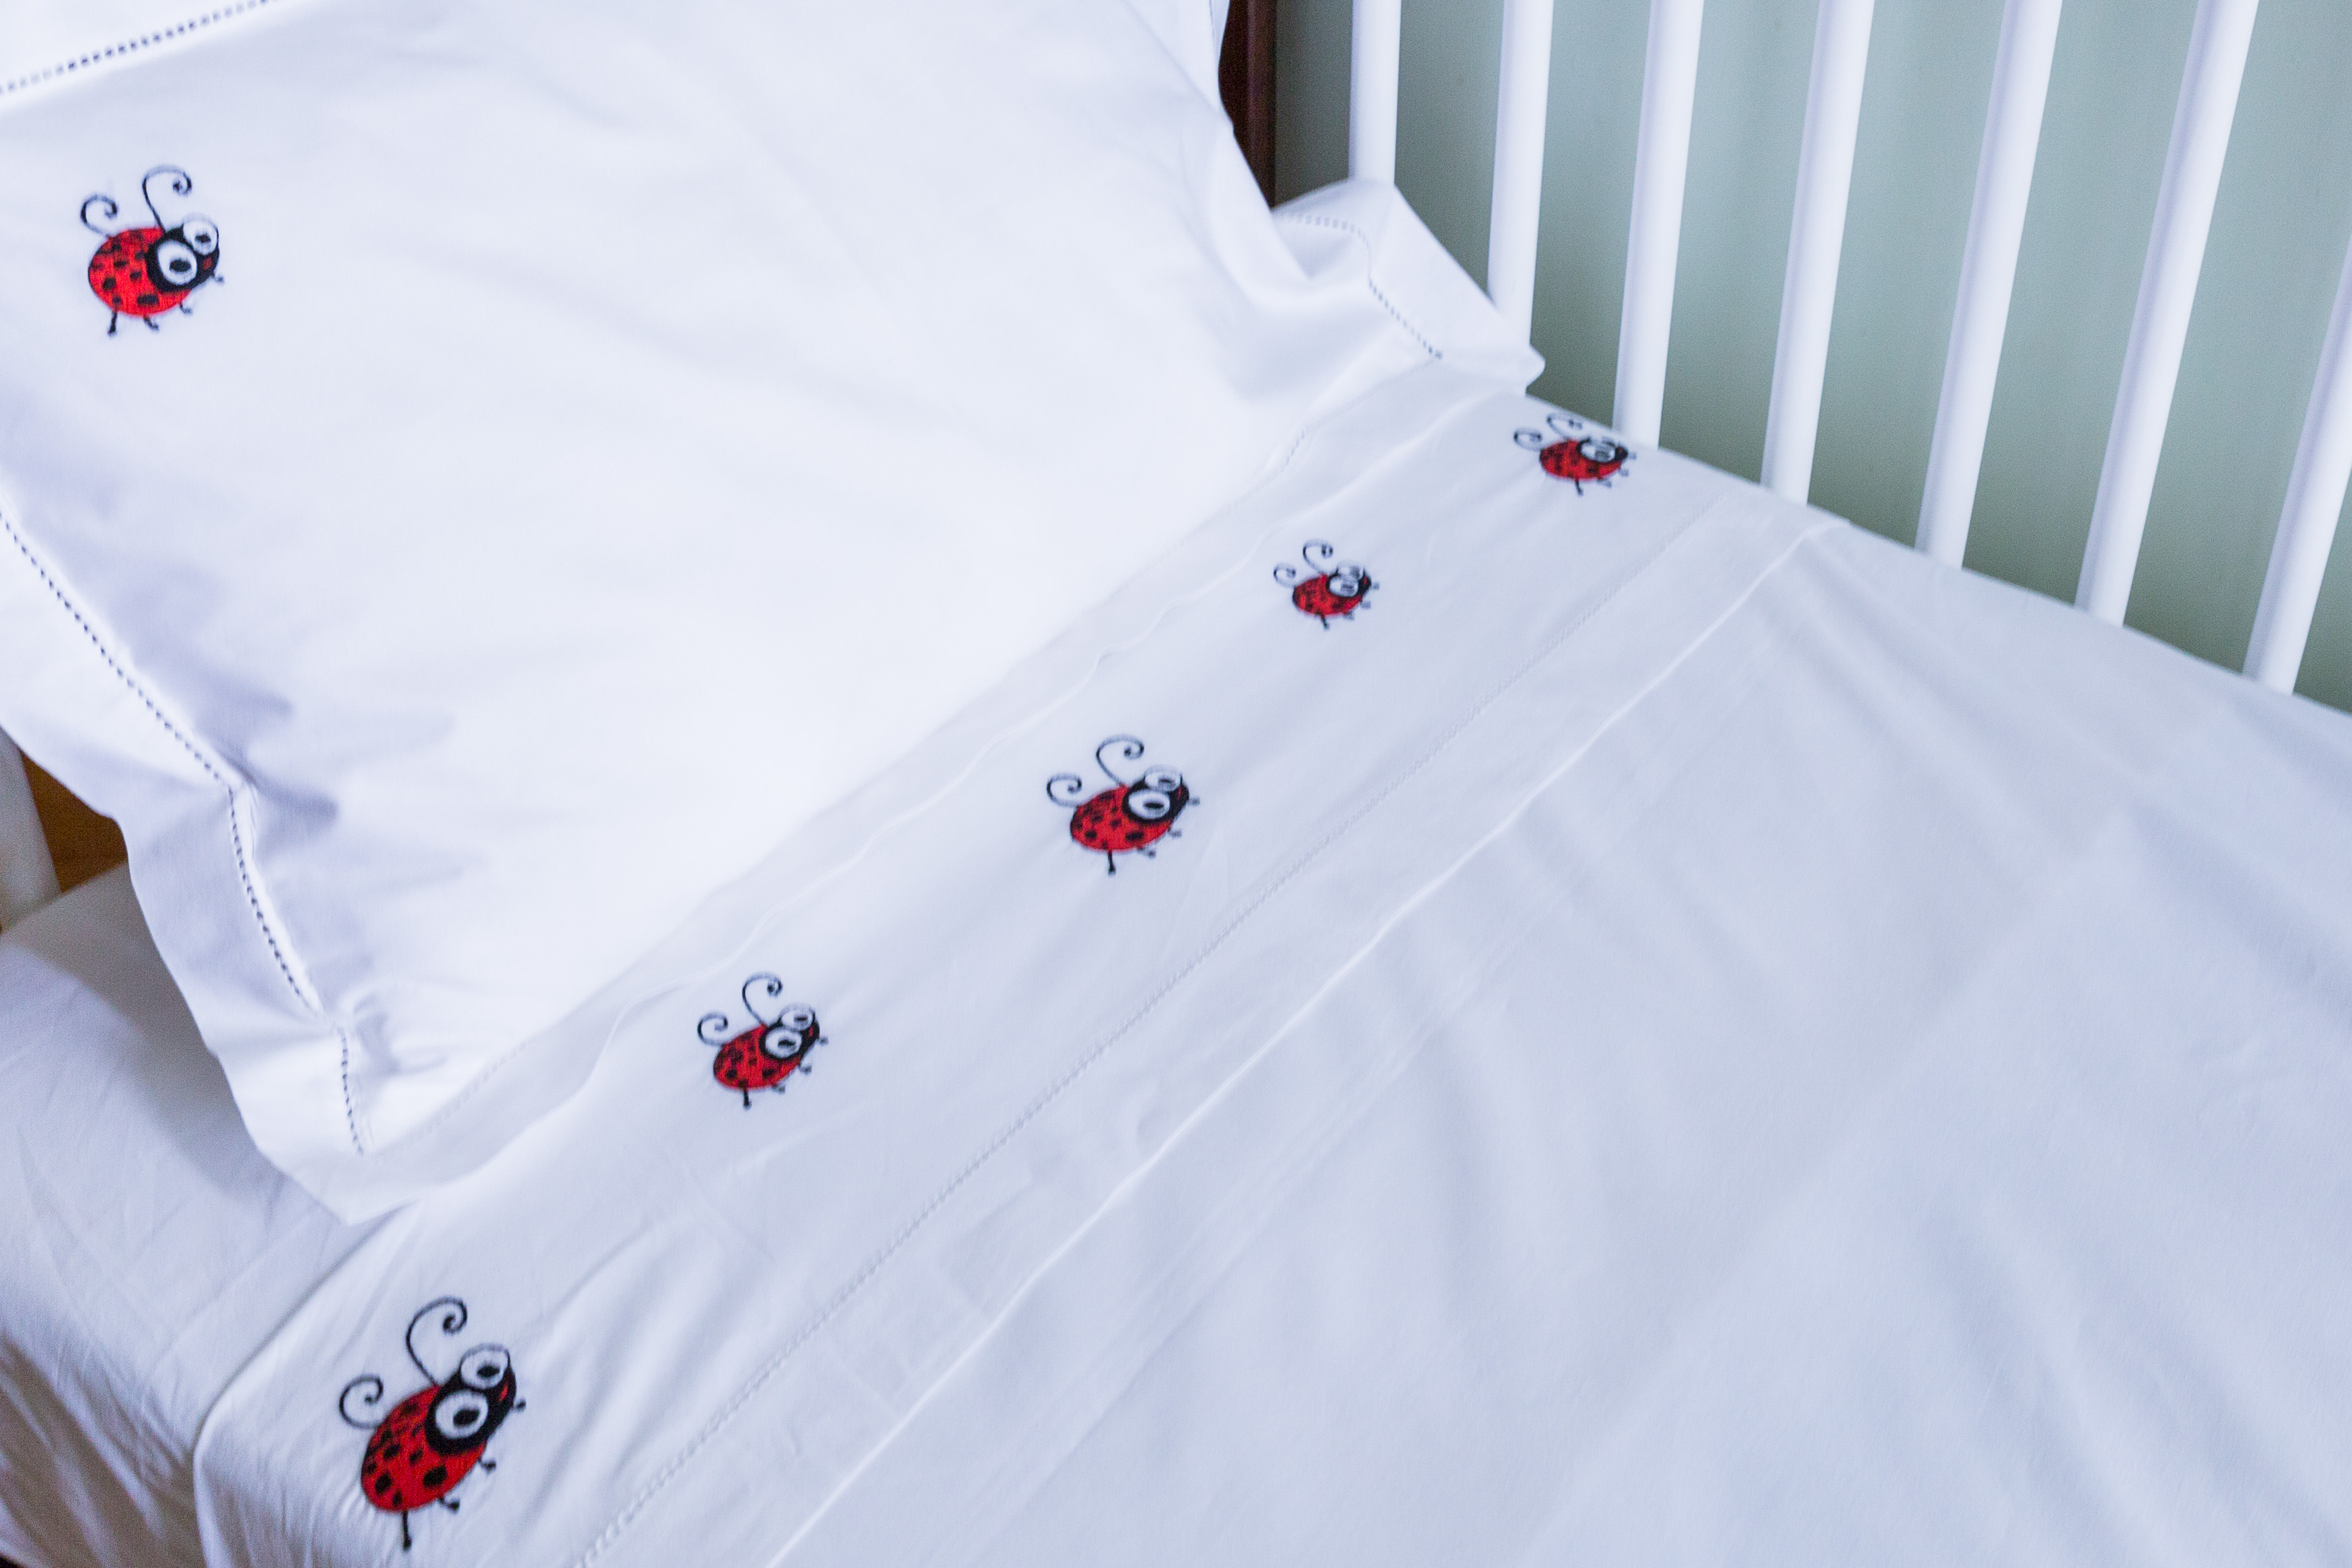 HANDCRAFTED BED LINEN FOR YOUR BABY